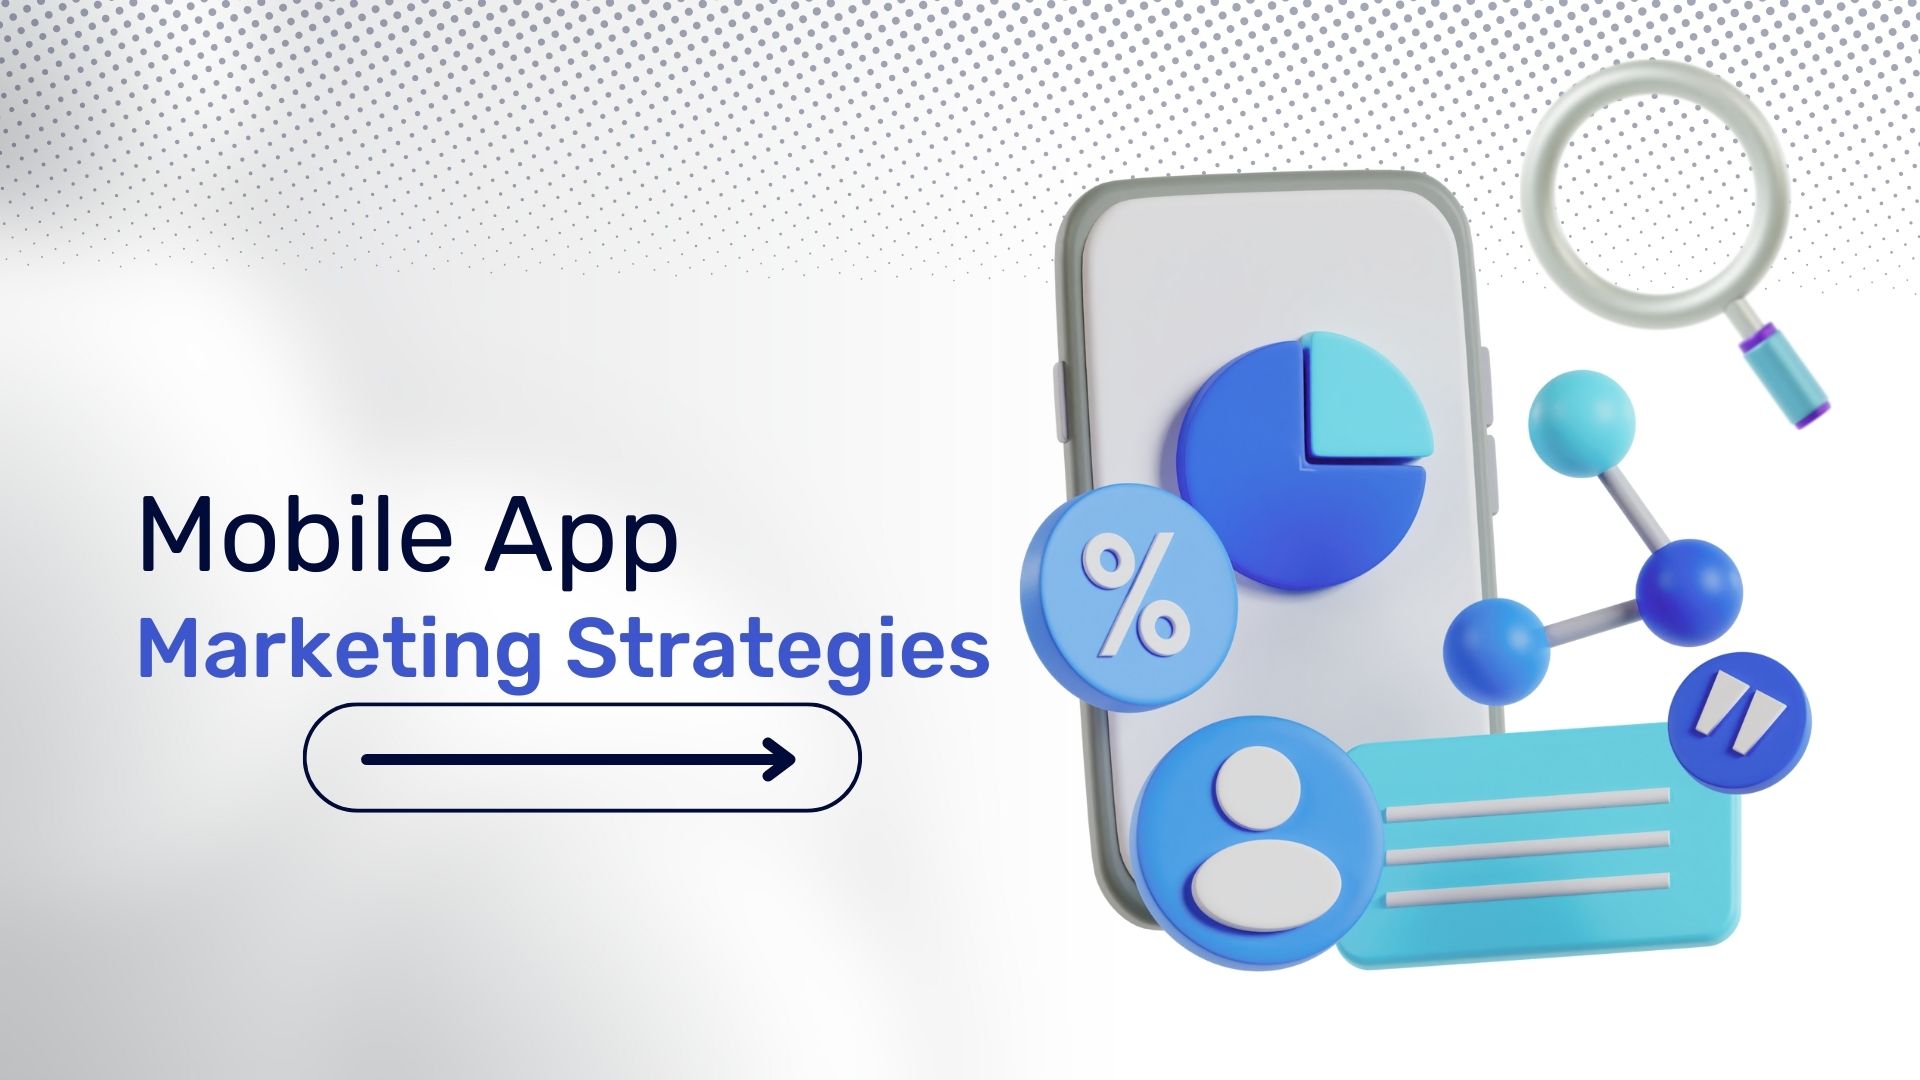 5 Mobile App Marketing Strategies That You Should Focus